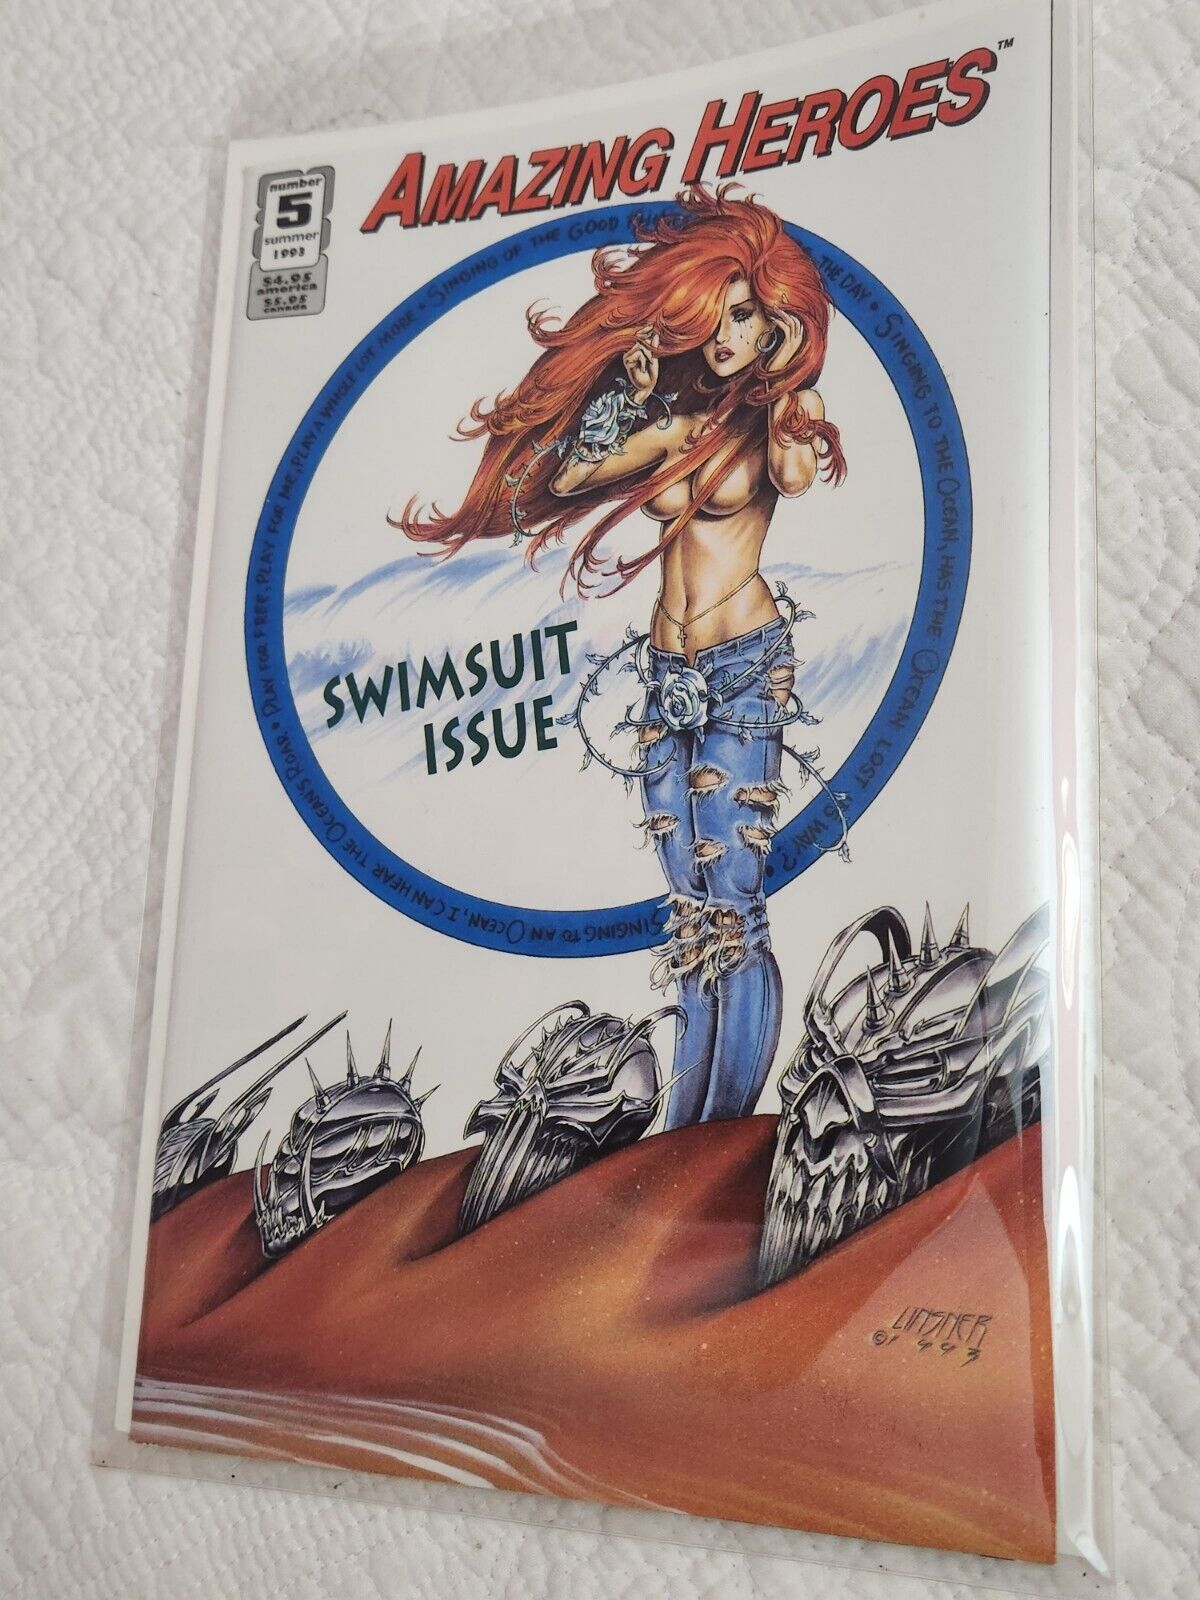 Amazing Heroes Swimsuit Issue 5 1993 52 Page MATURE CONTENT Dawn Lisner Comics